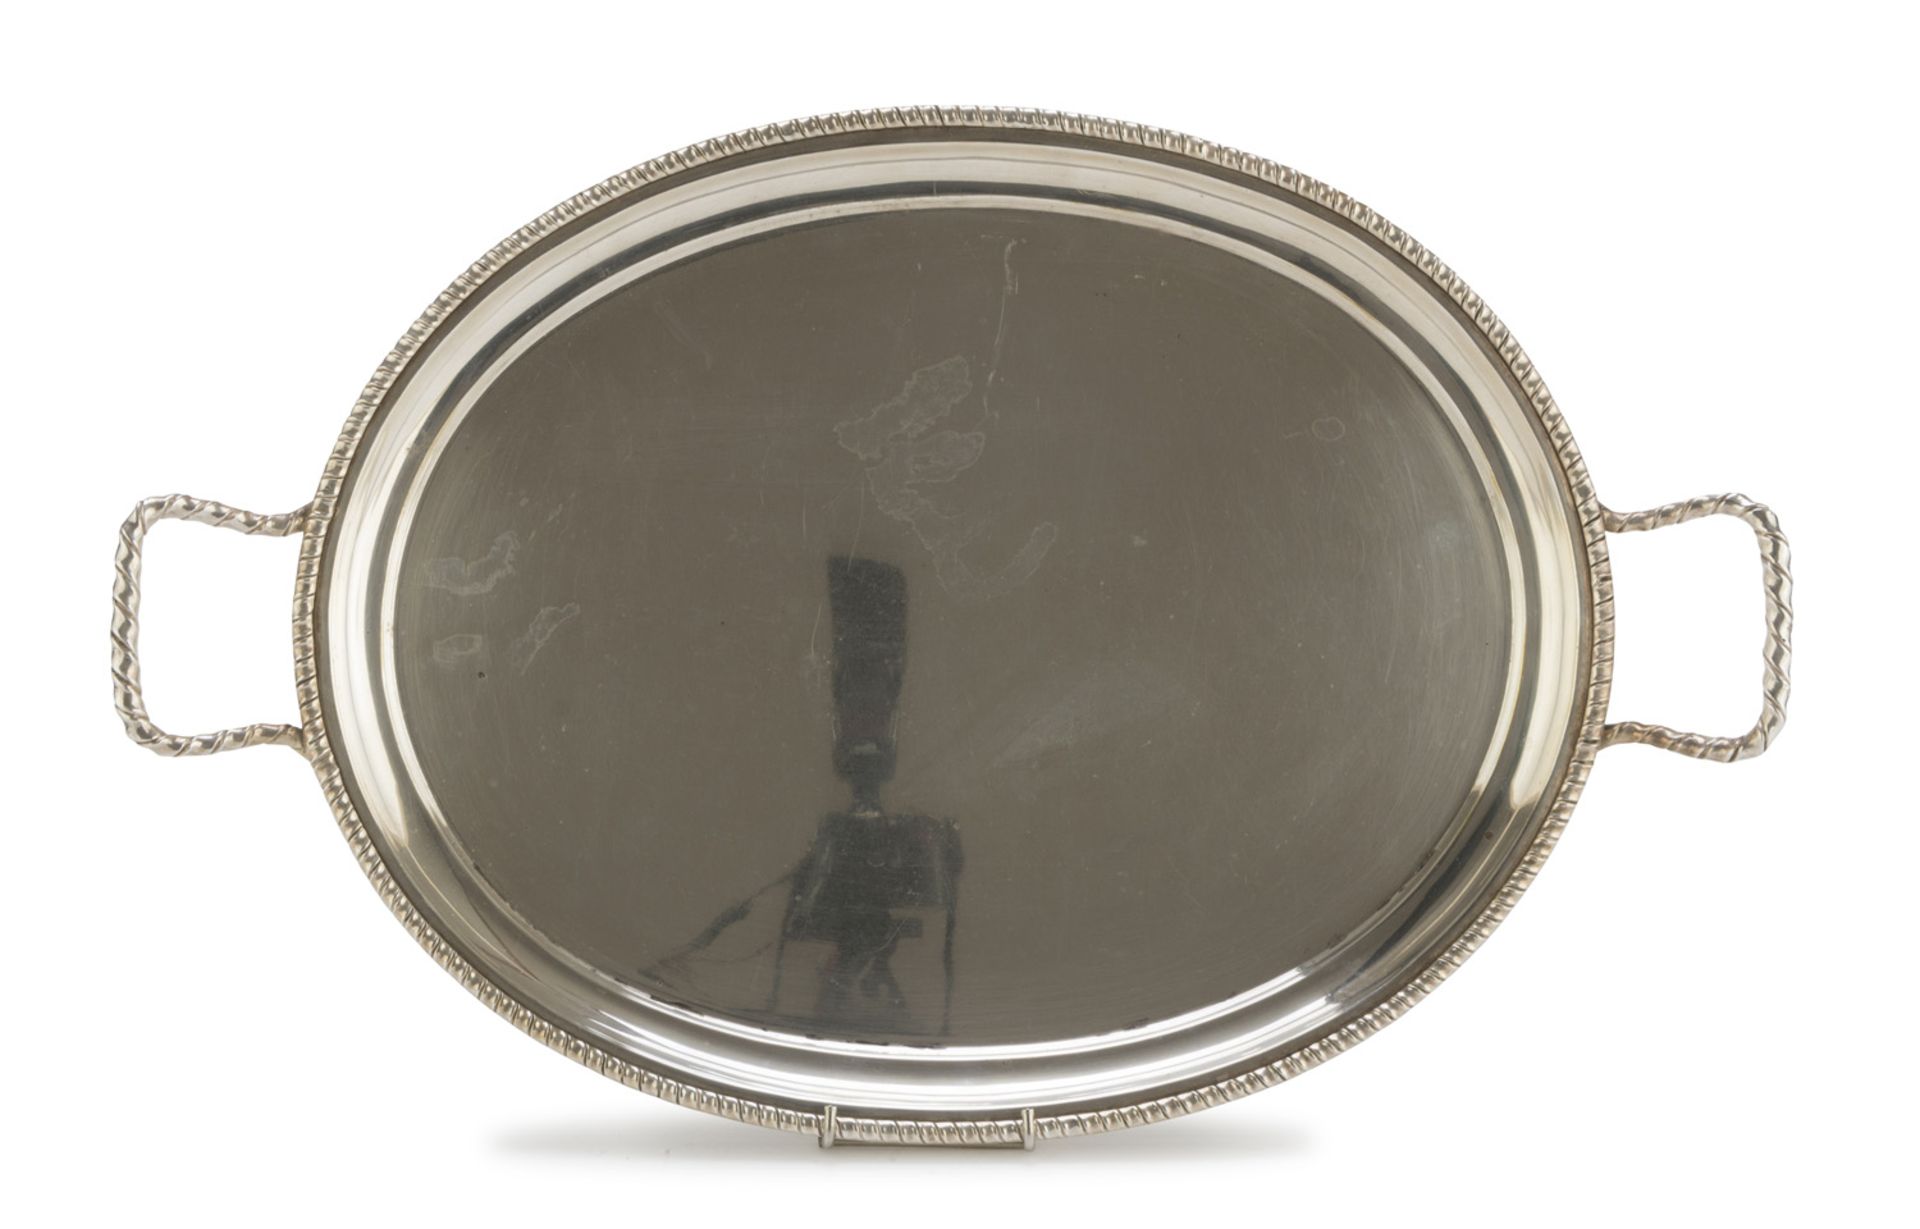 SILVER TRAY, GERMANY LATE 19TH CENTURY with ribbon edge and handles. Measures cm. 33 x 52, weight